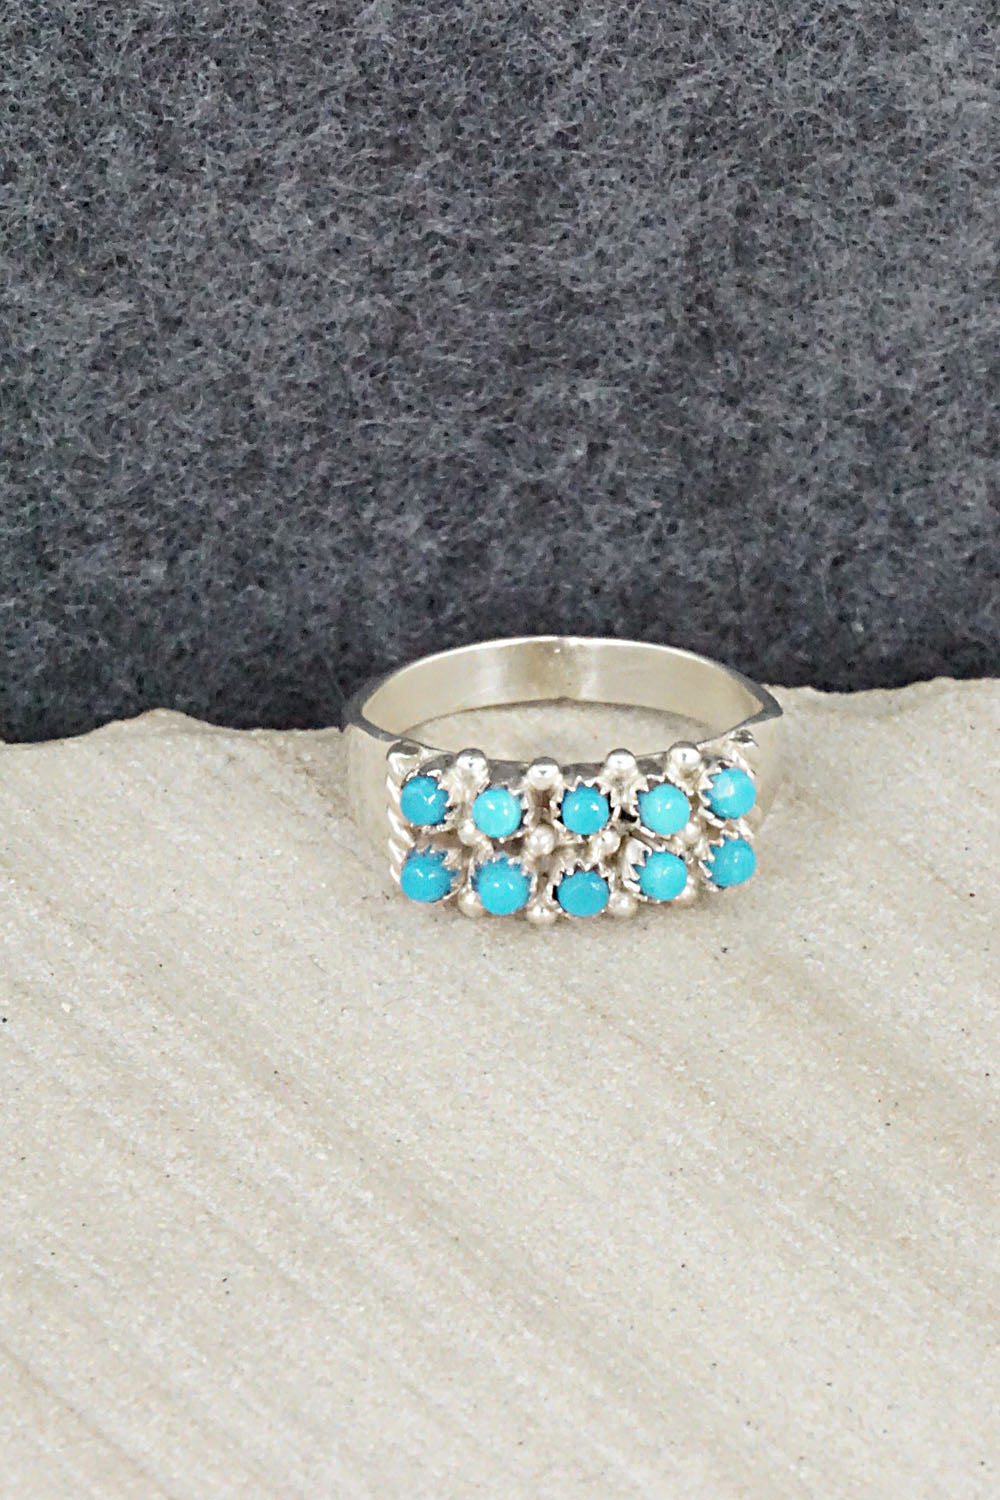 Turquoise & Sterling Silver Ring - April Haloo - Size 6.75